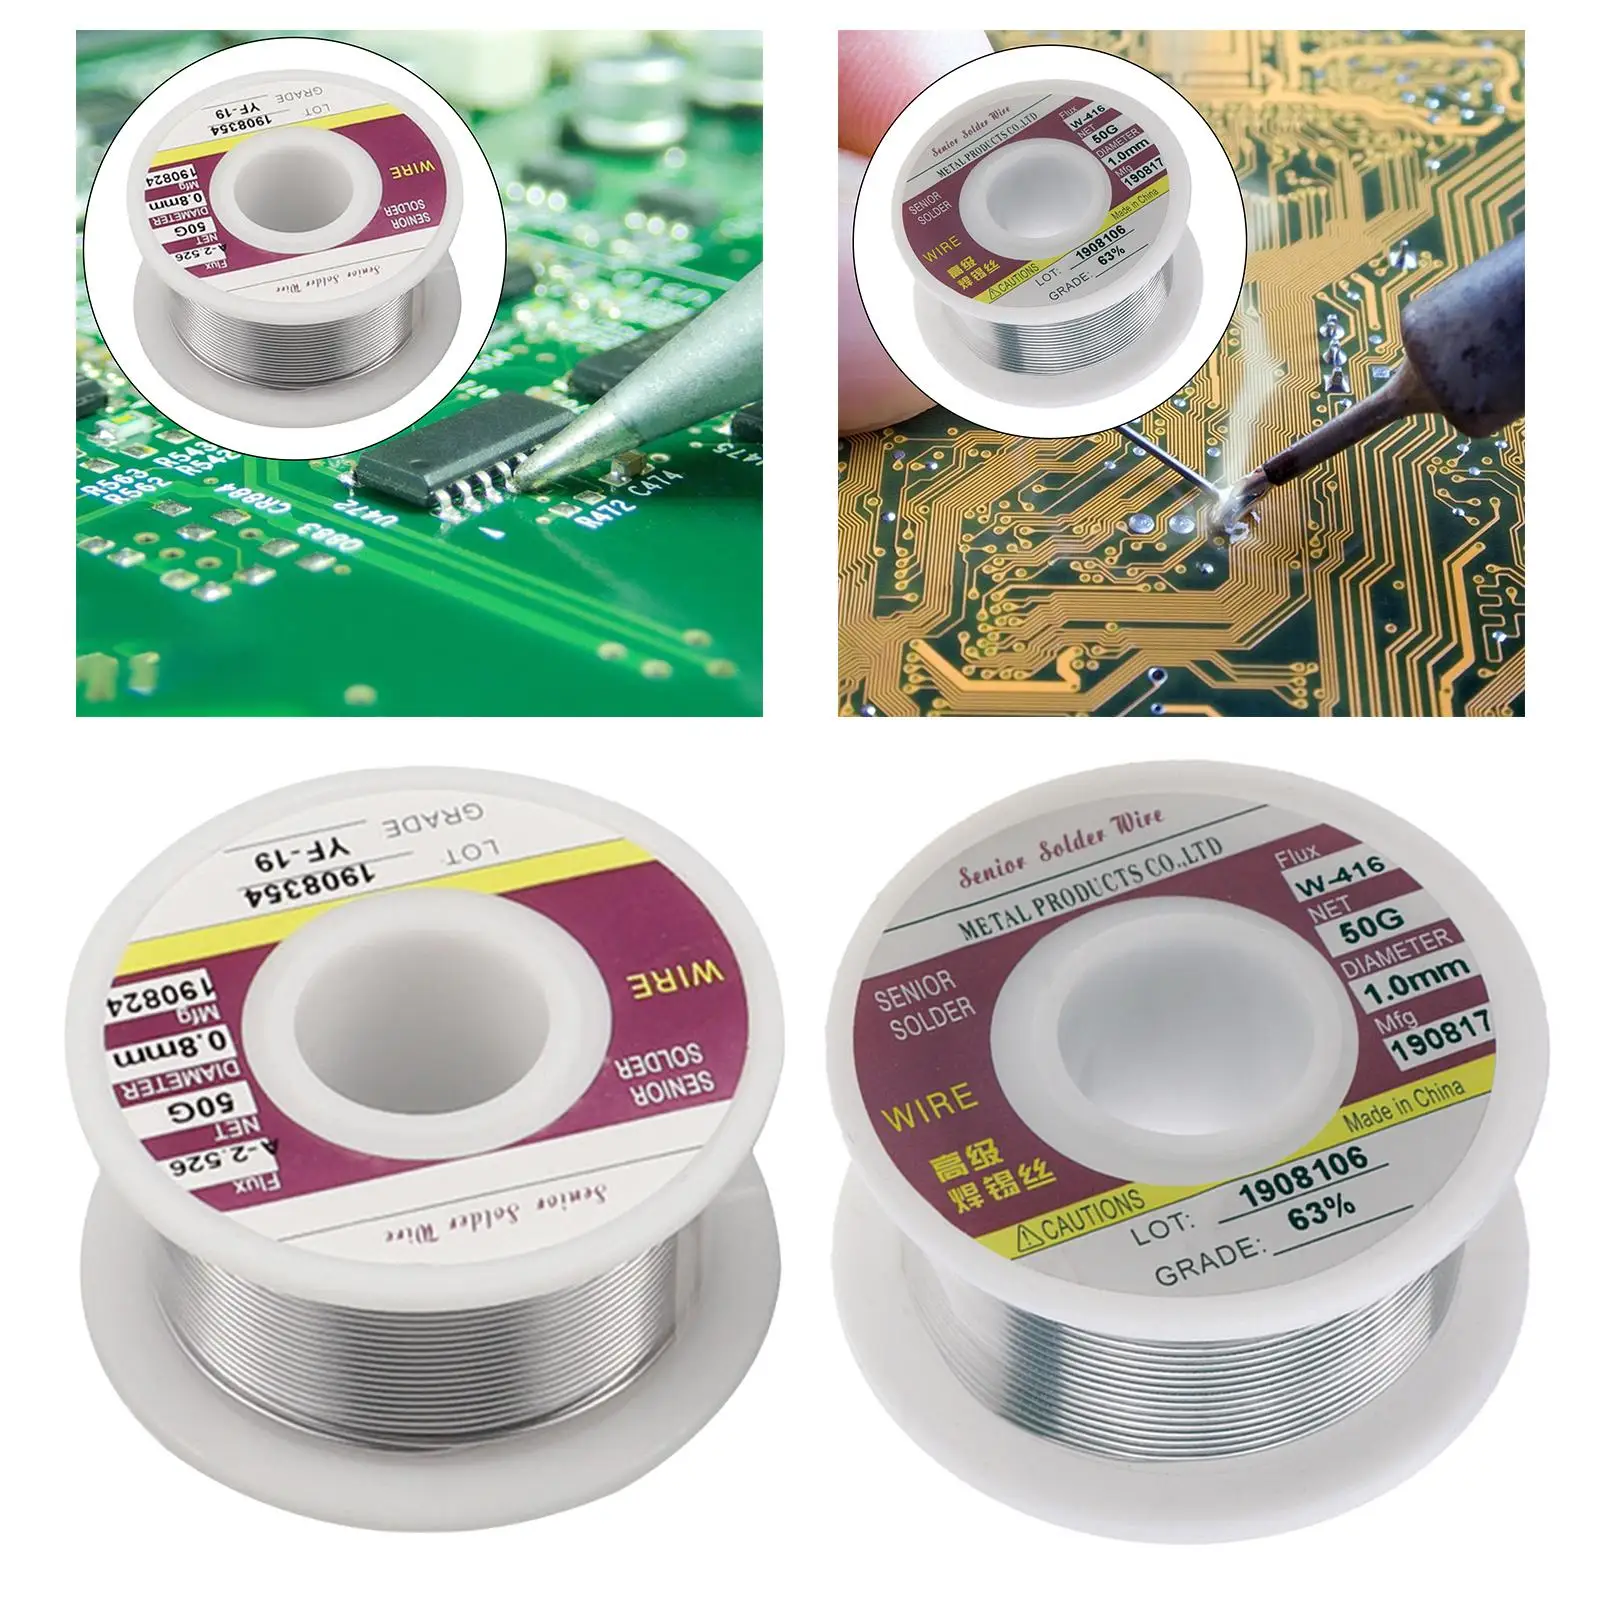 Soldering Wire Reel Multifunctional Easy to Use Solder Tin Wire for Computers Repair Circuit Boards Electrical Soldering